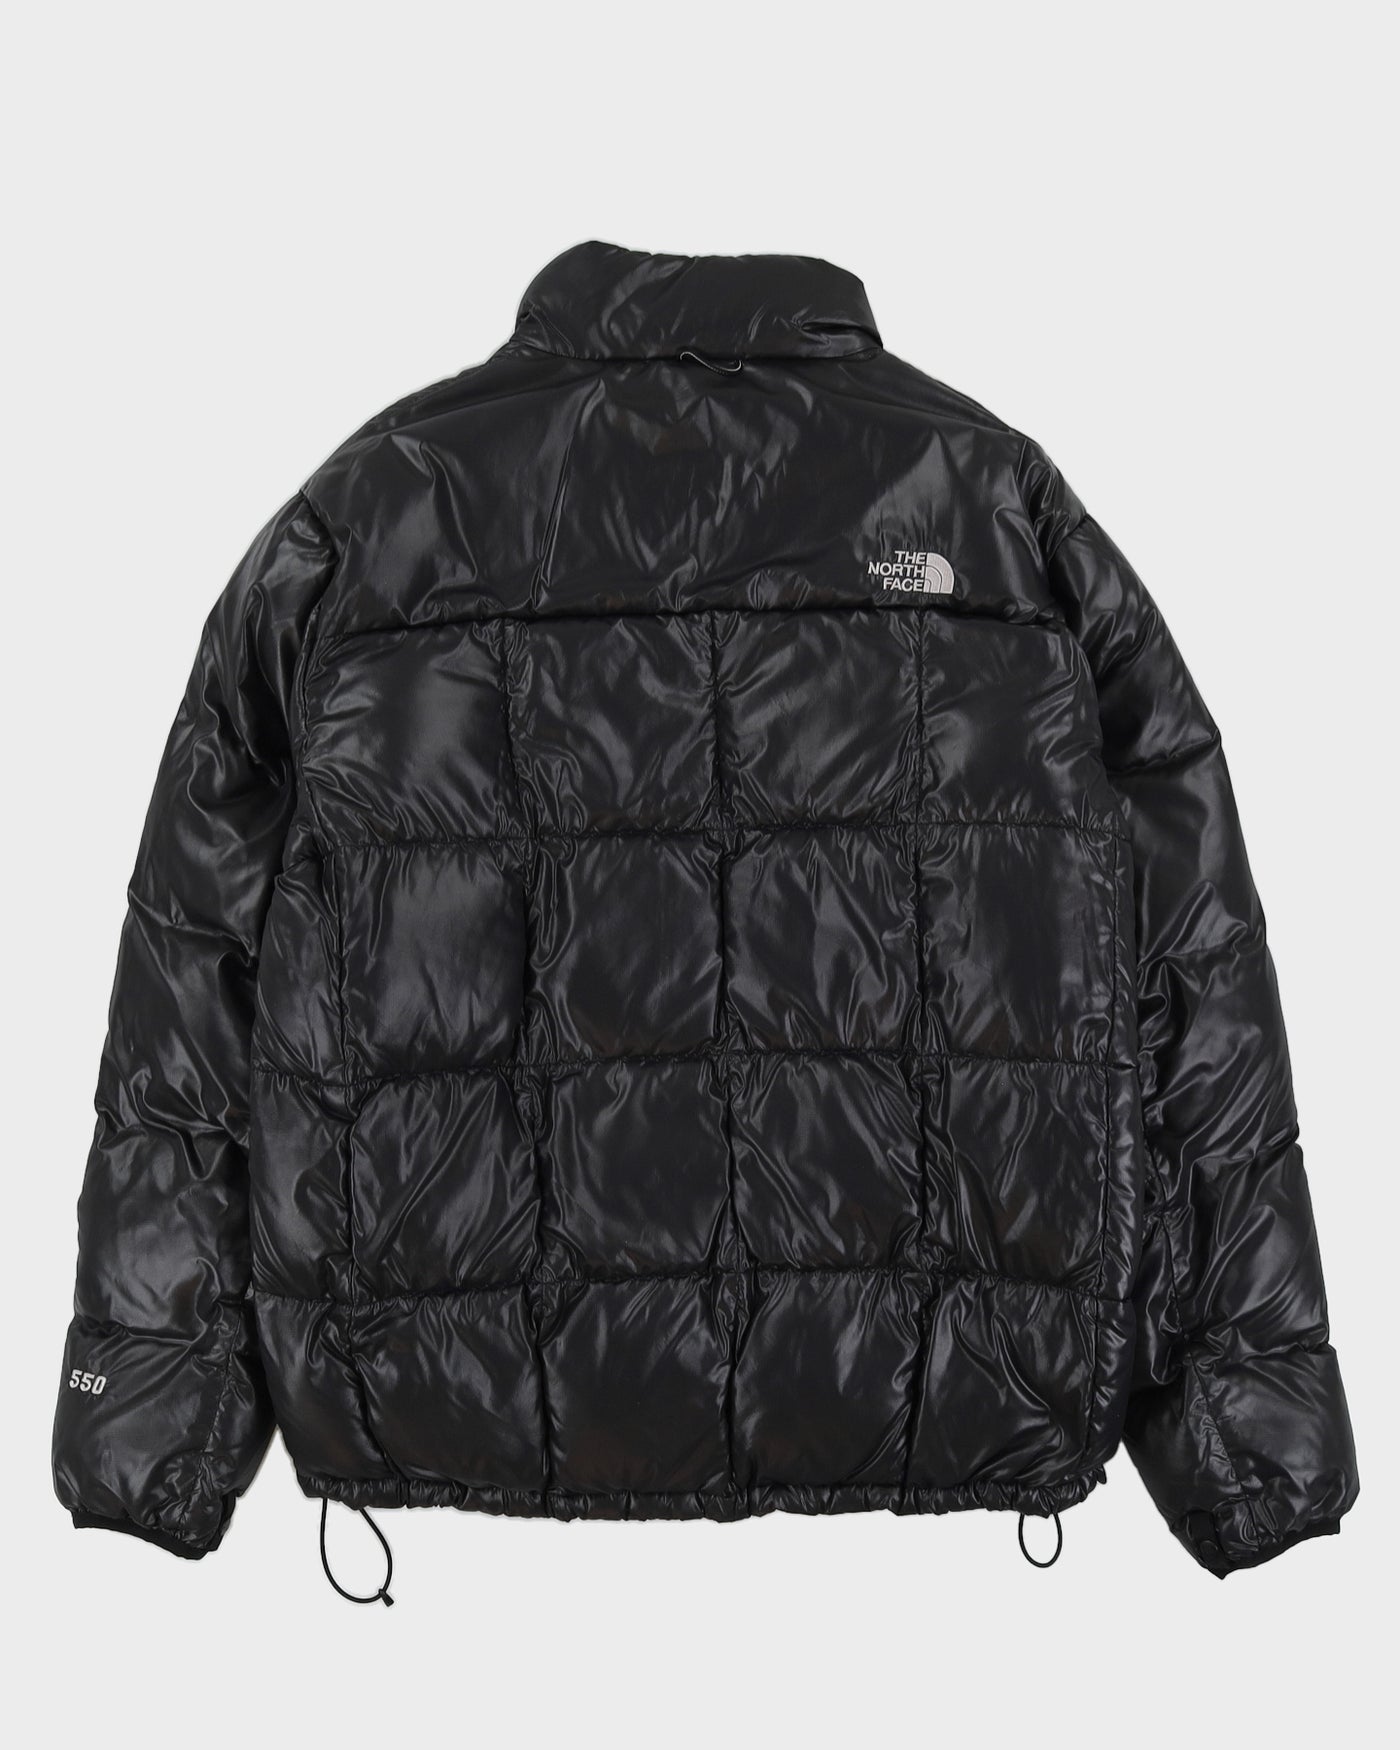 The North Face 550 Black Puffer Jacket - XL